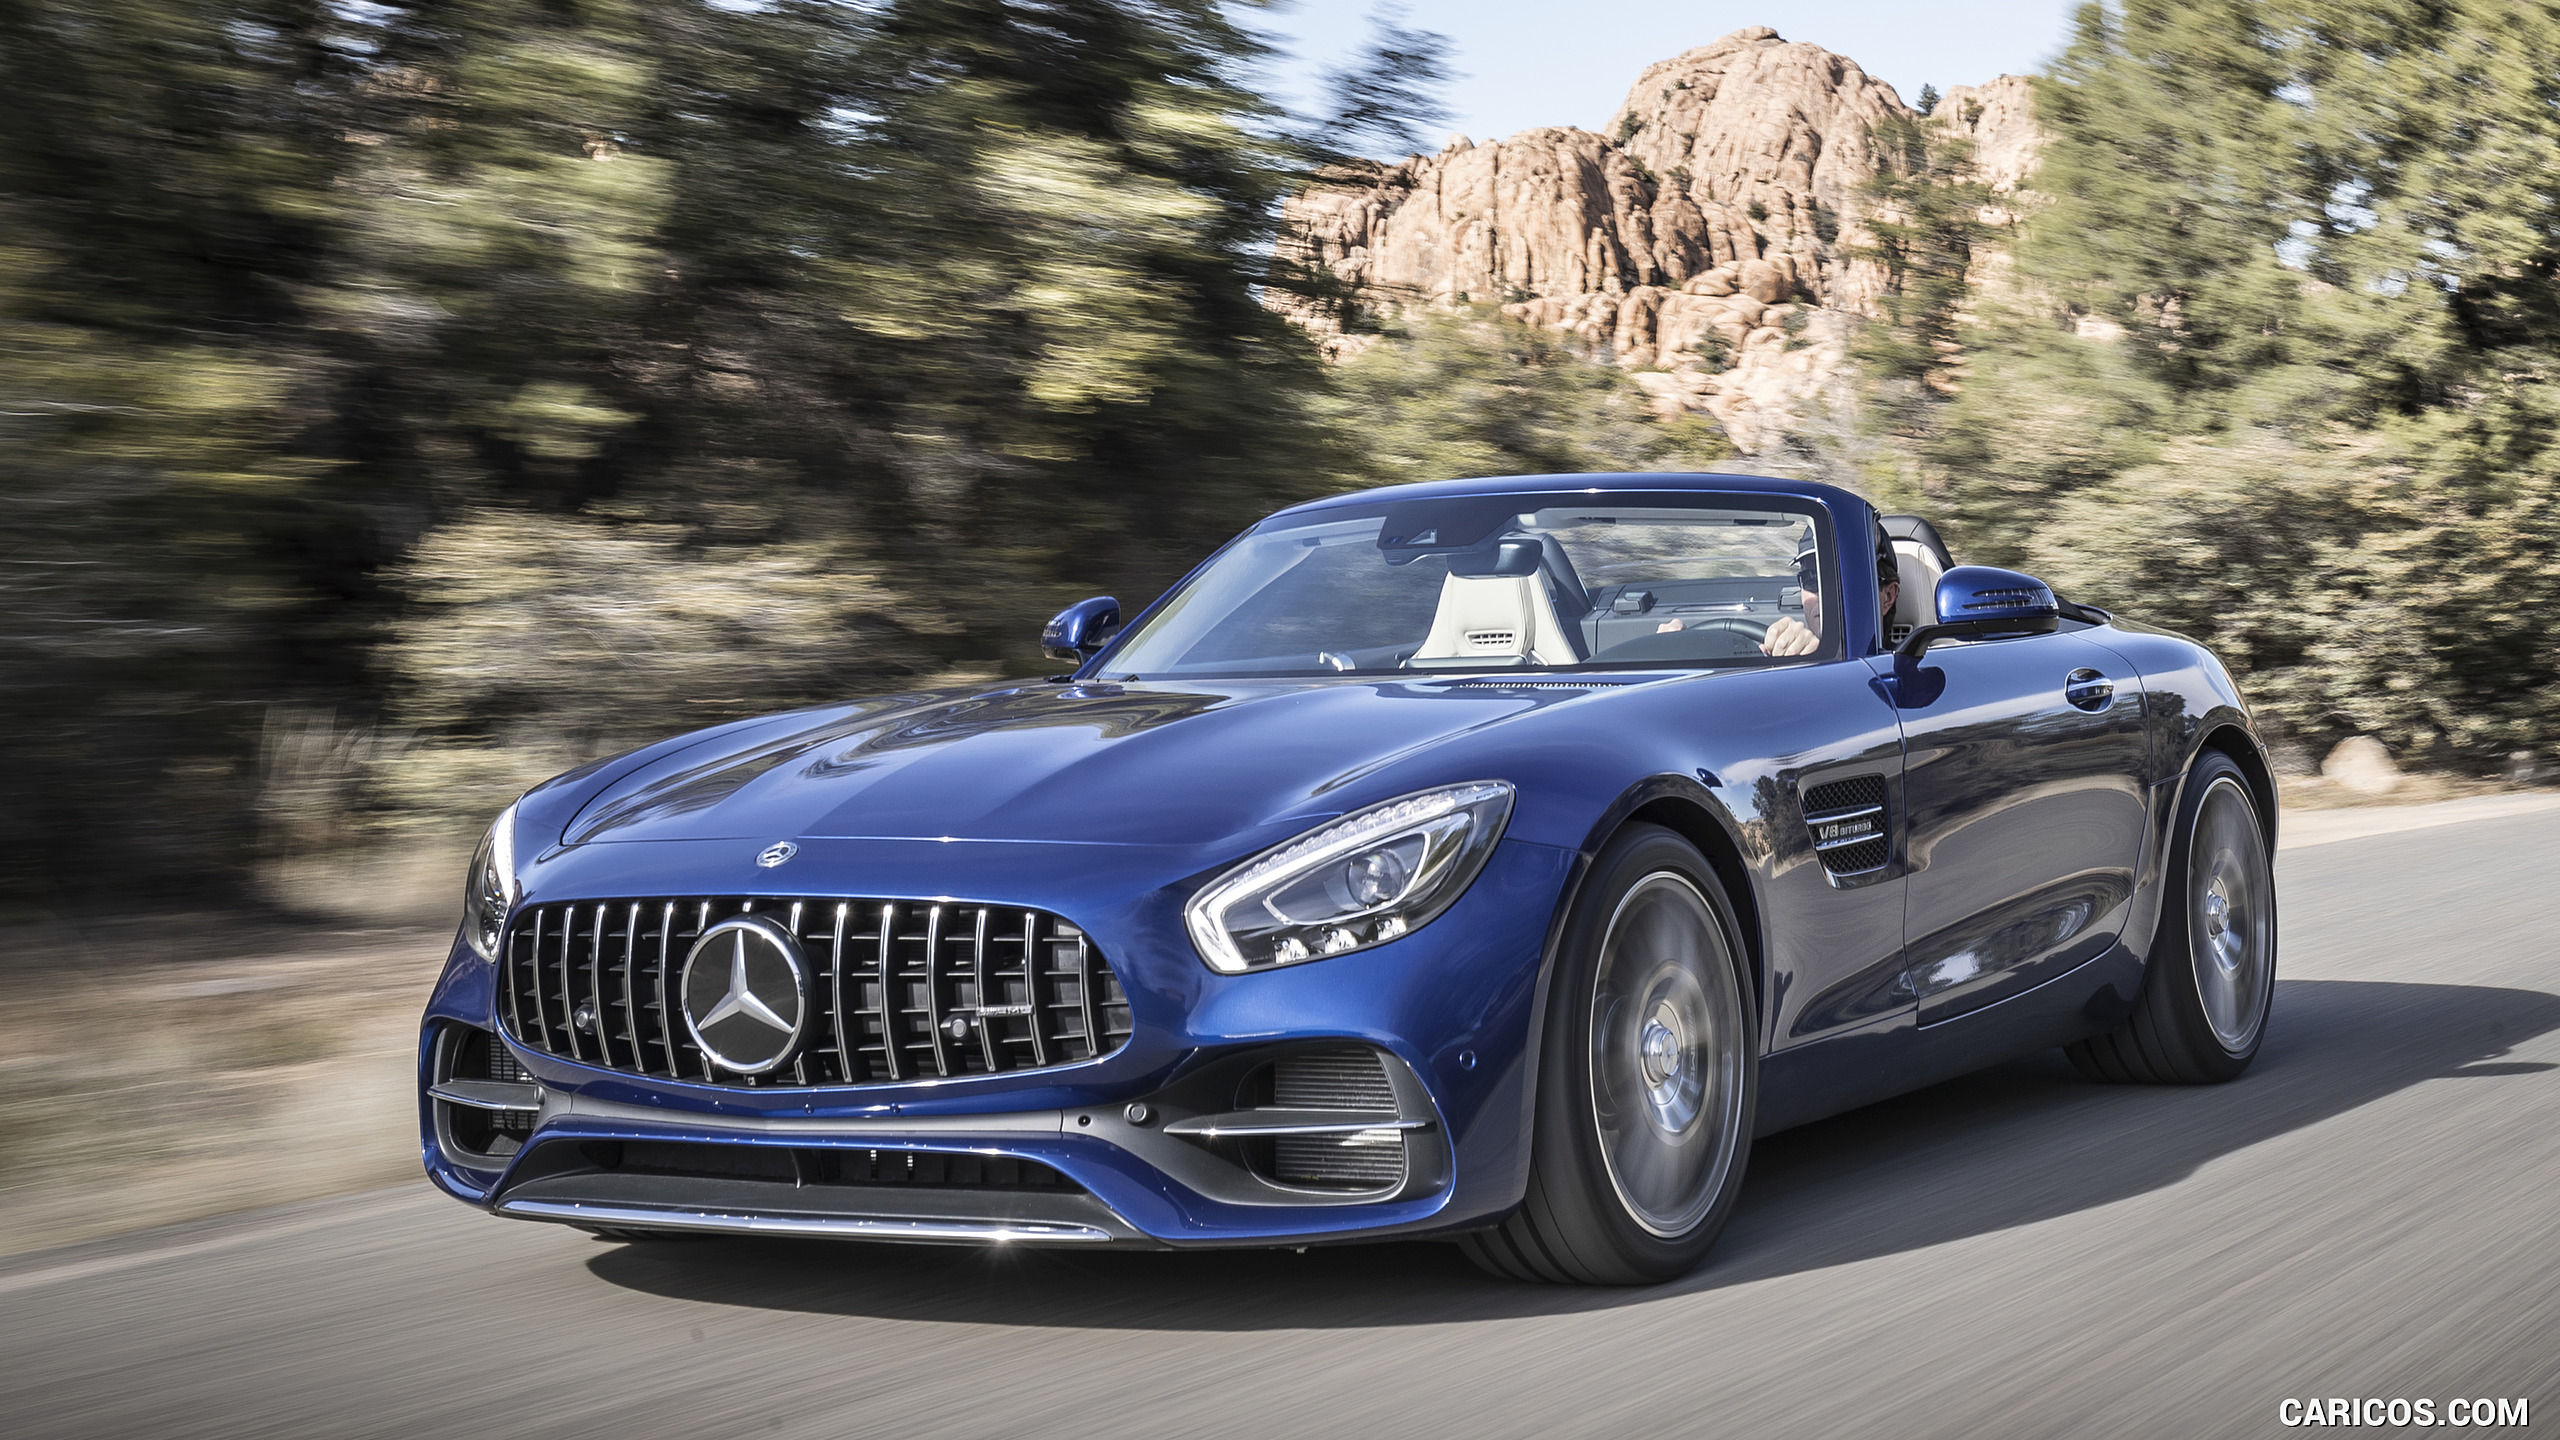 2018 Mercedes-AMG GT Roadster - Front Three-Quarter, #135 of 350